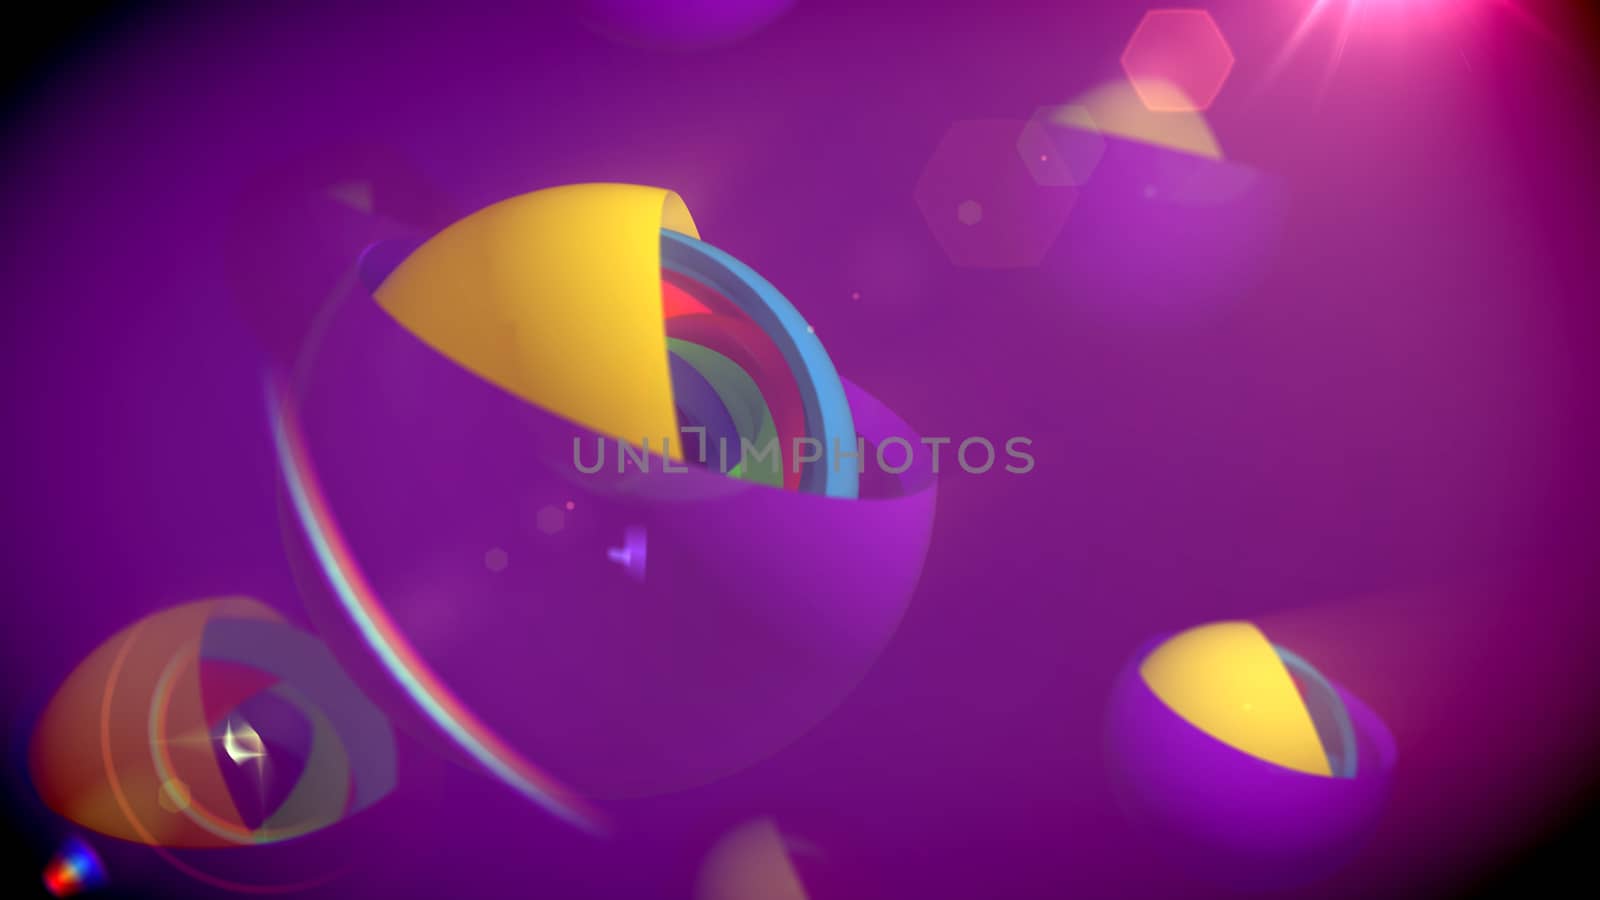 An artistic 3d illustration of nested camera objects of rainbow colors inserted in big semi-spheres with shutters in the blue backdrop. They create the mood of cheerfulness, curiosity and joy.